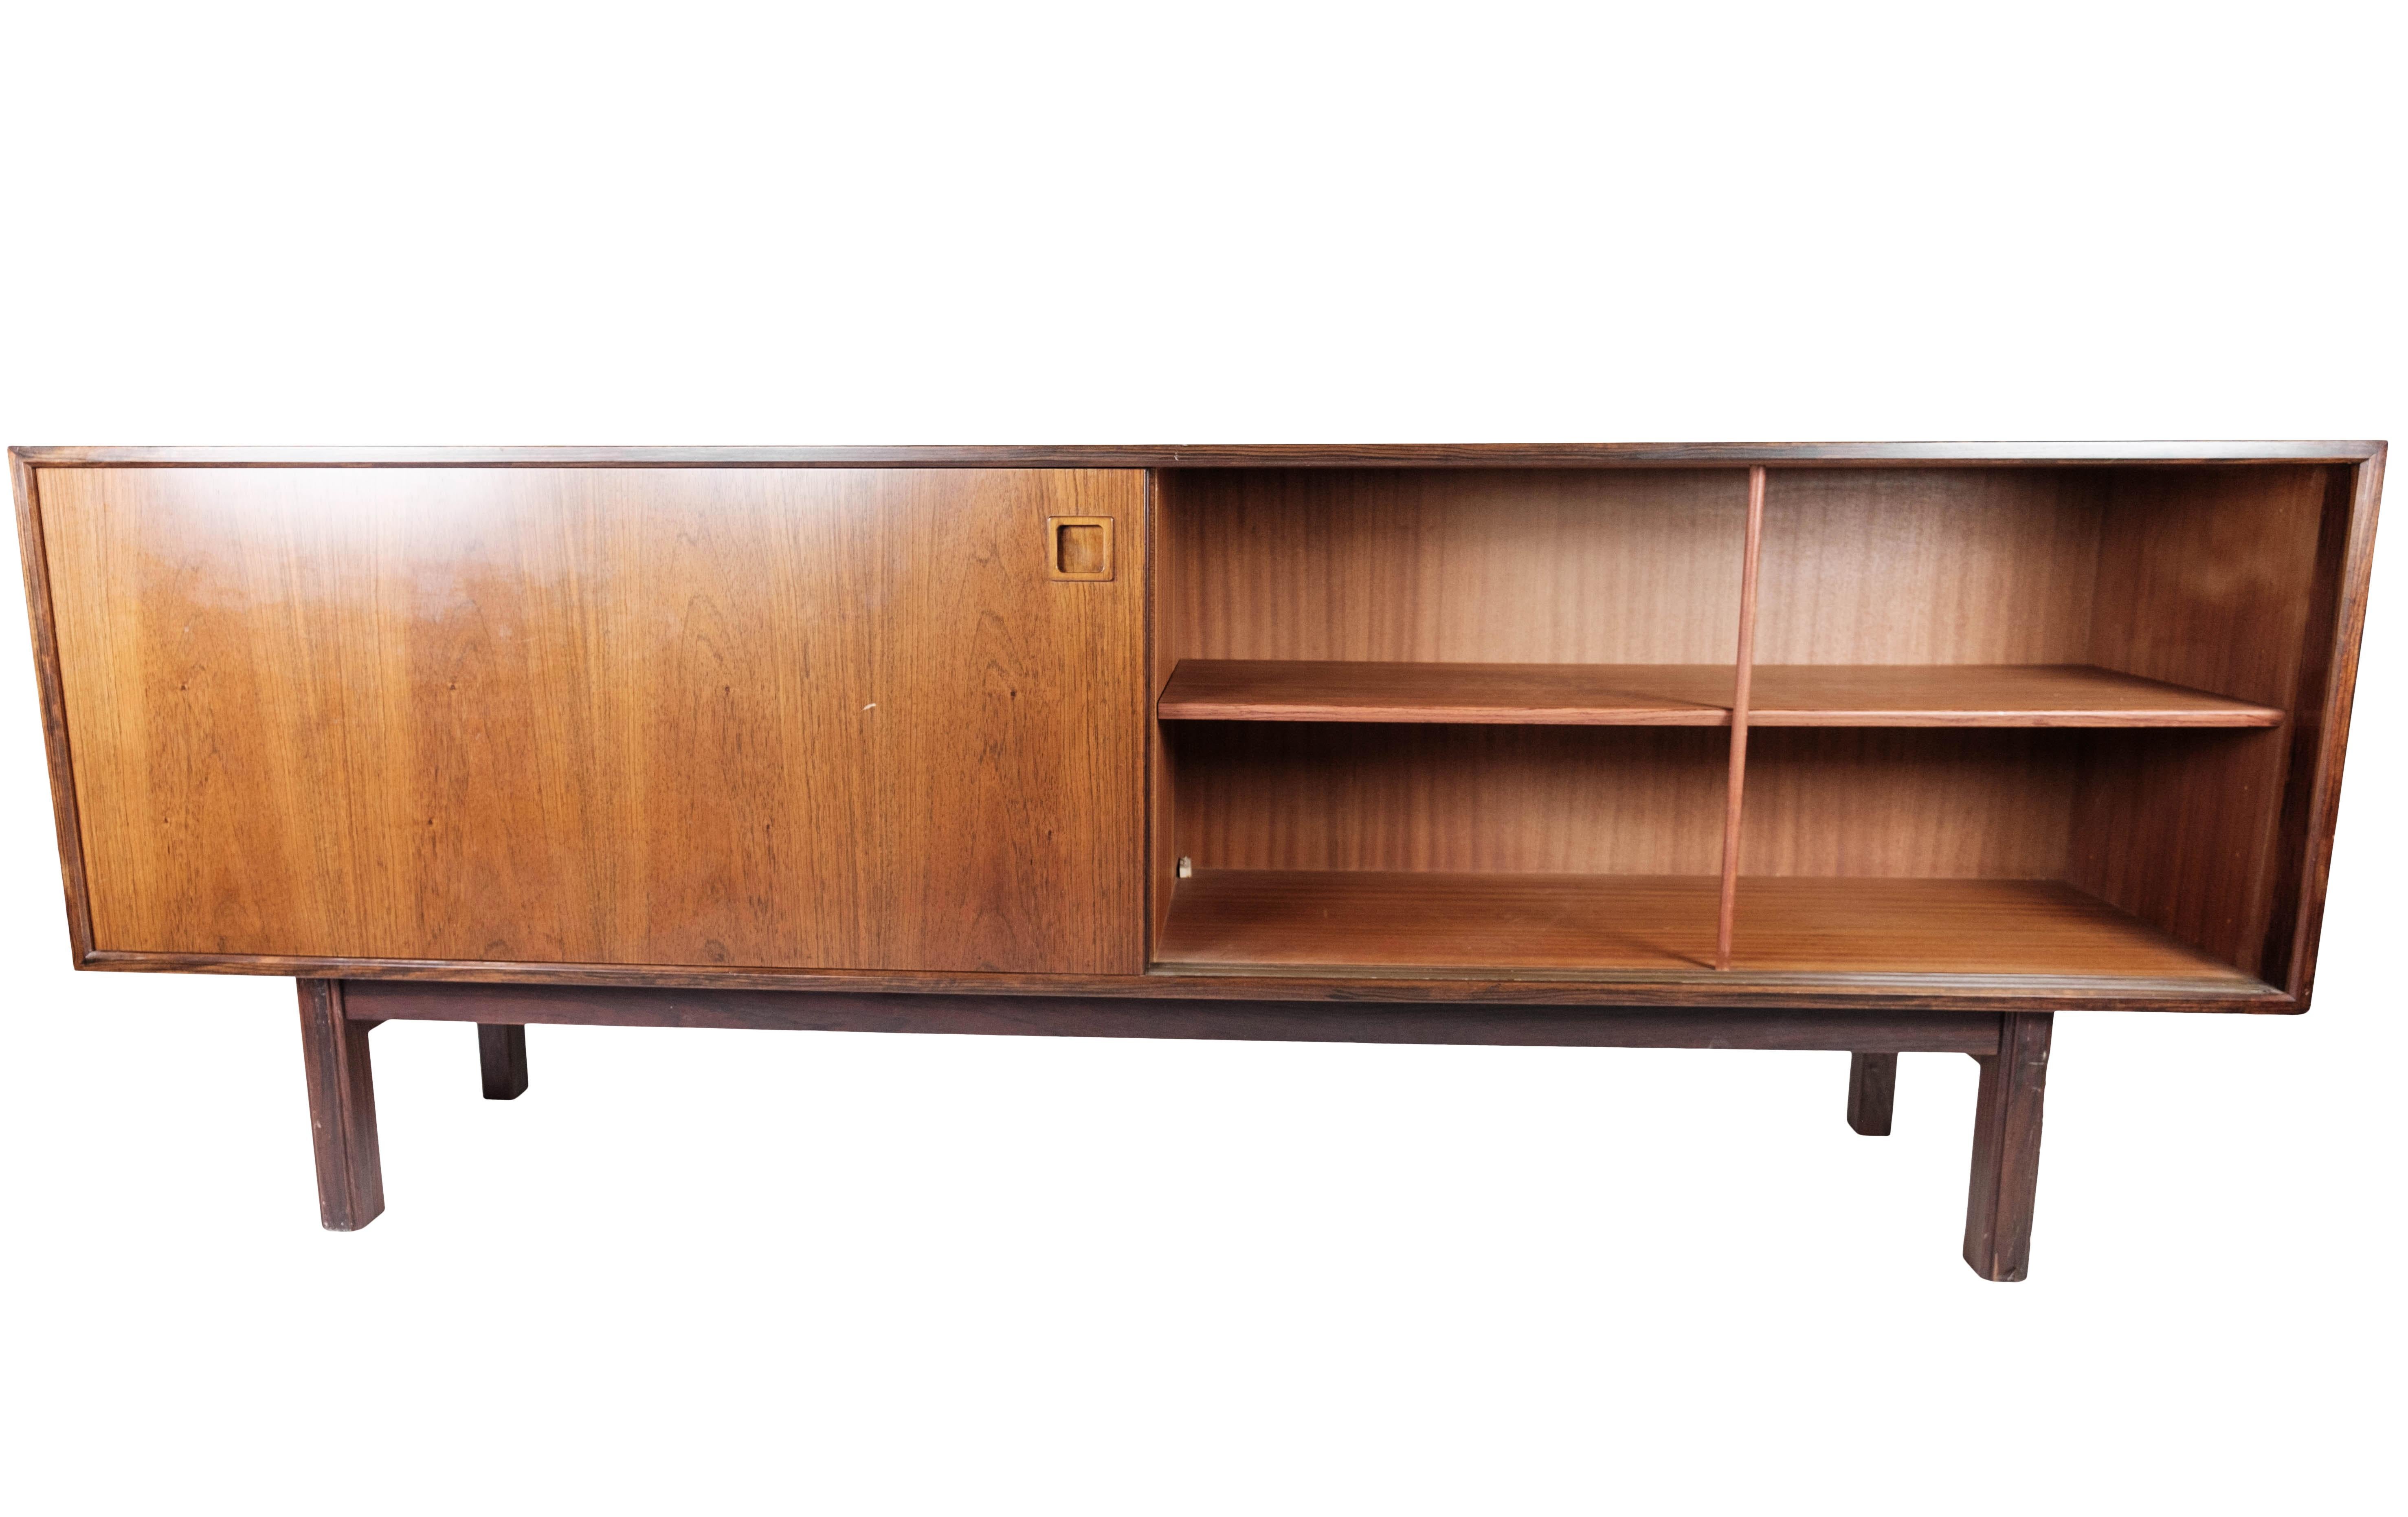 Danish Sideboard in Rosewood with Sliding Doors Designed by Omann Junior from the 1960s